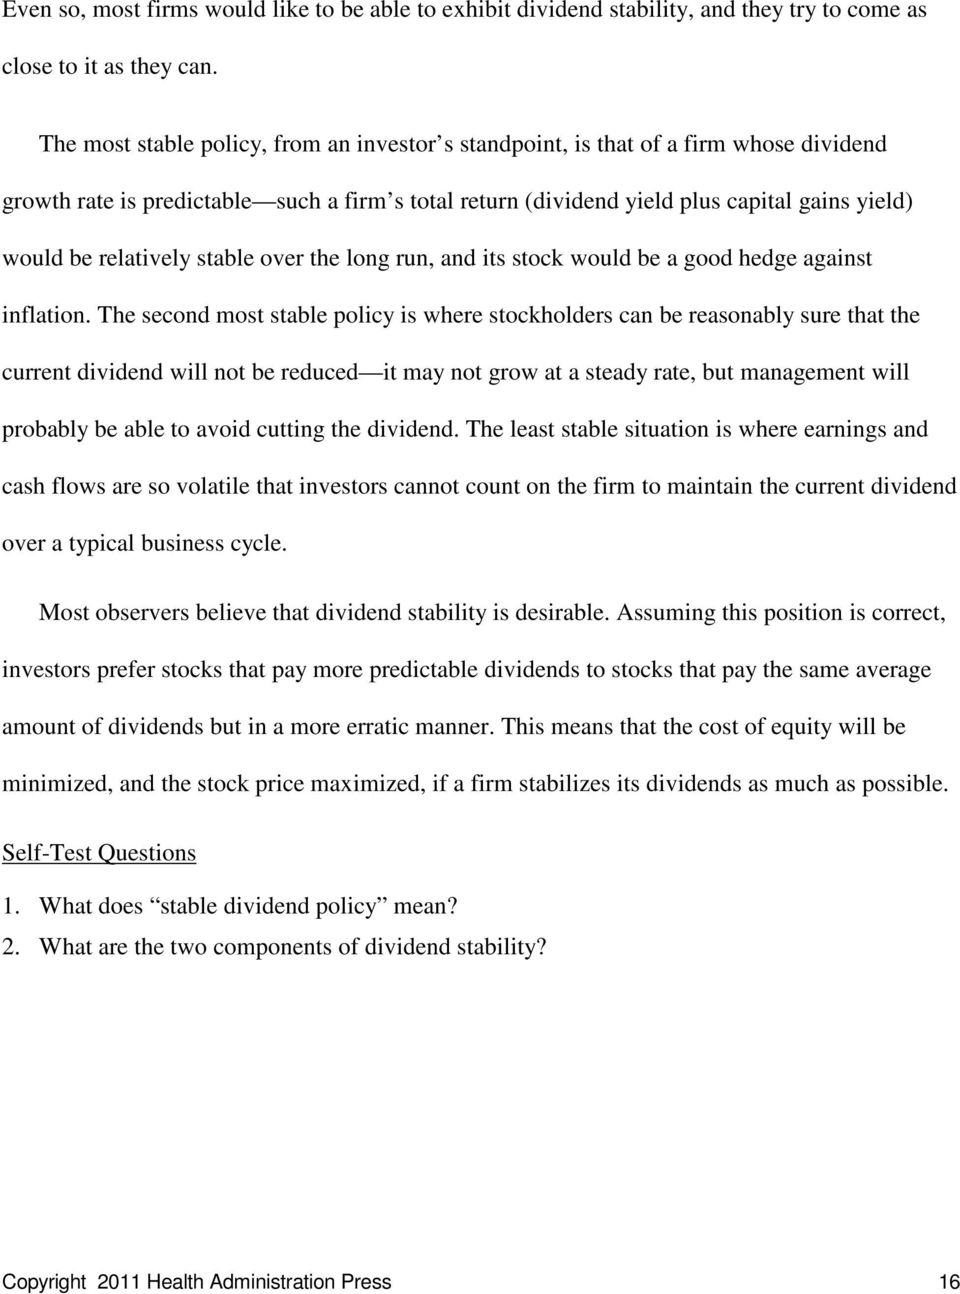 dividend stability policy